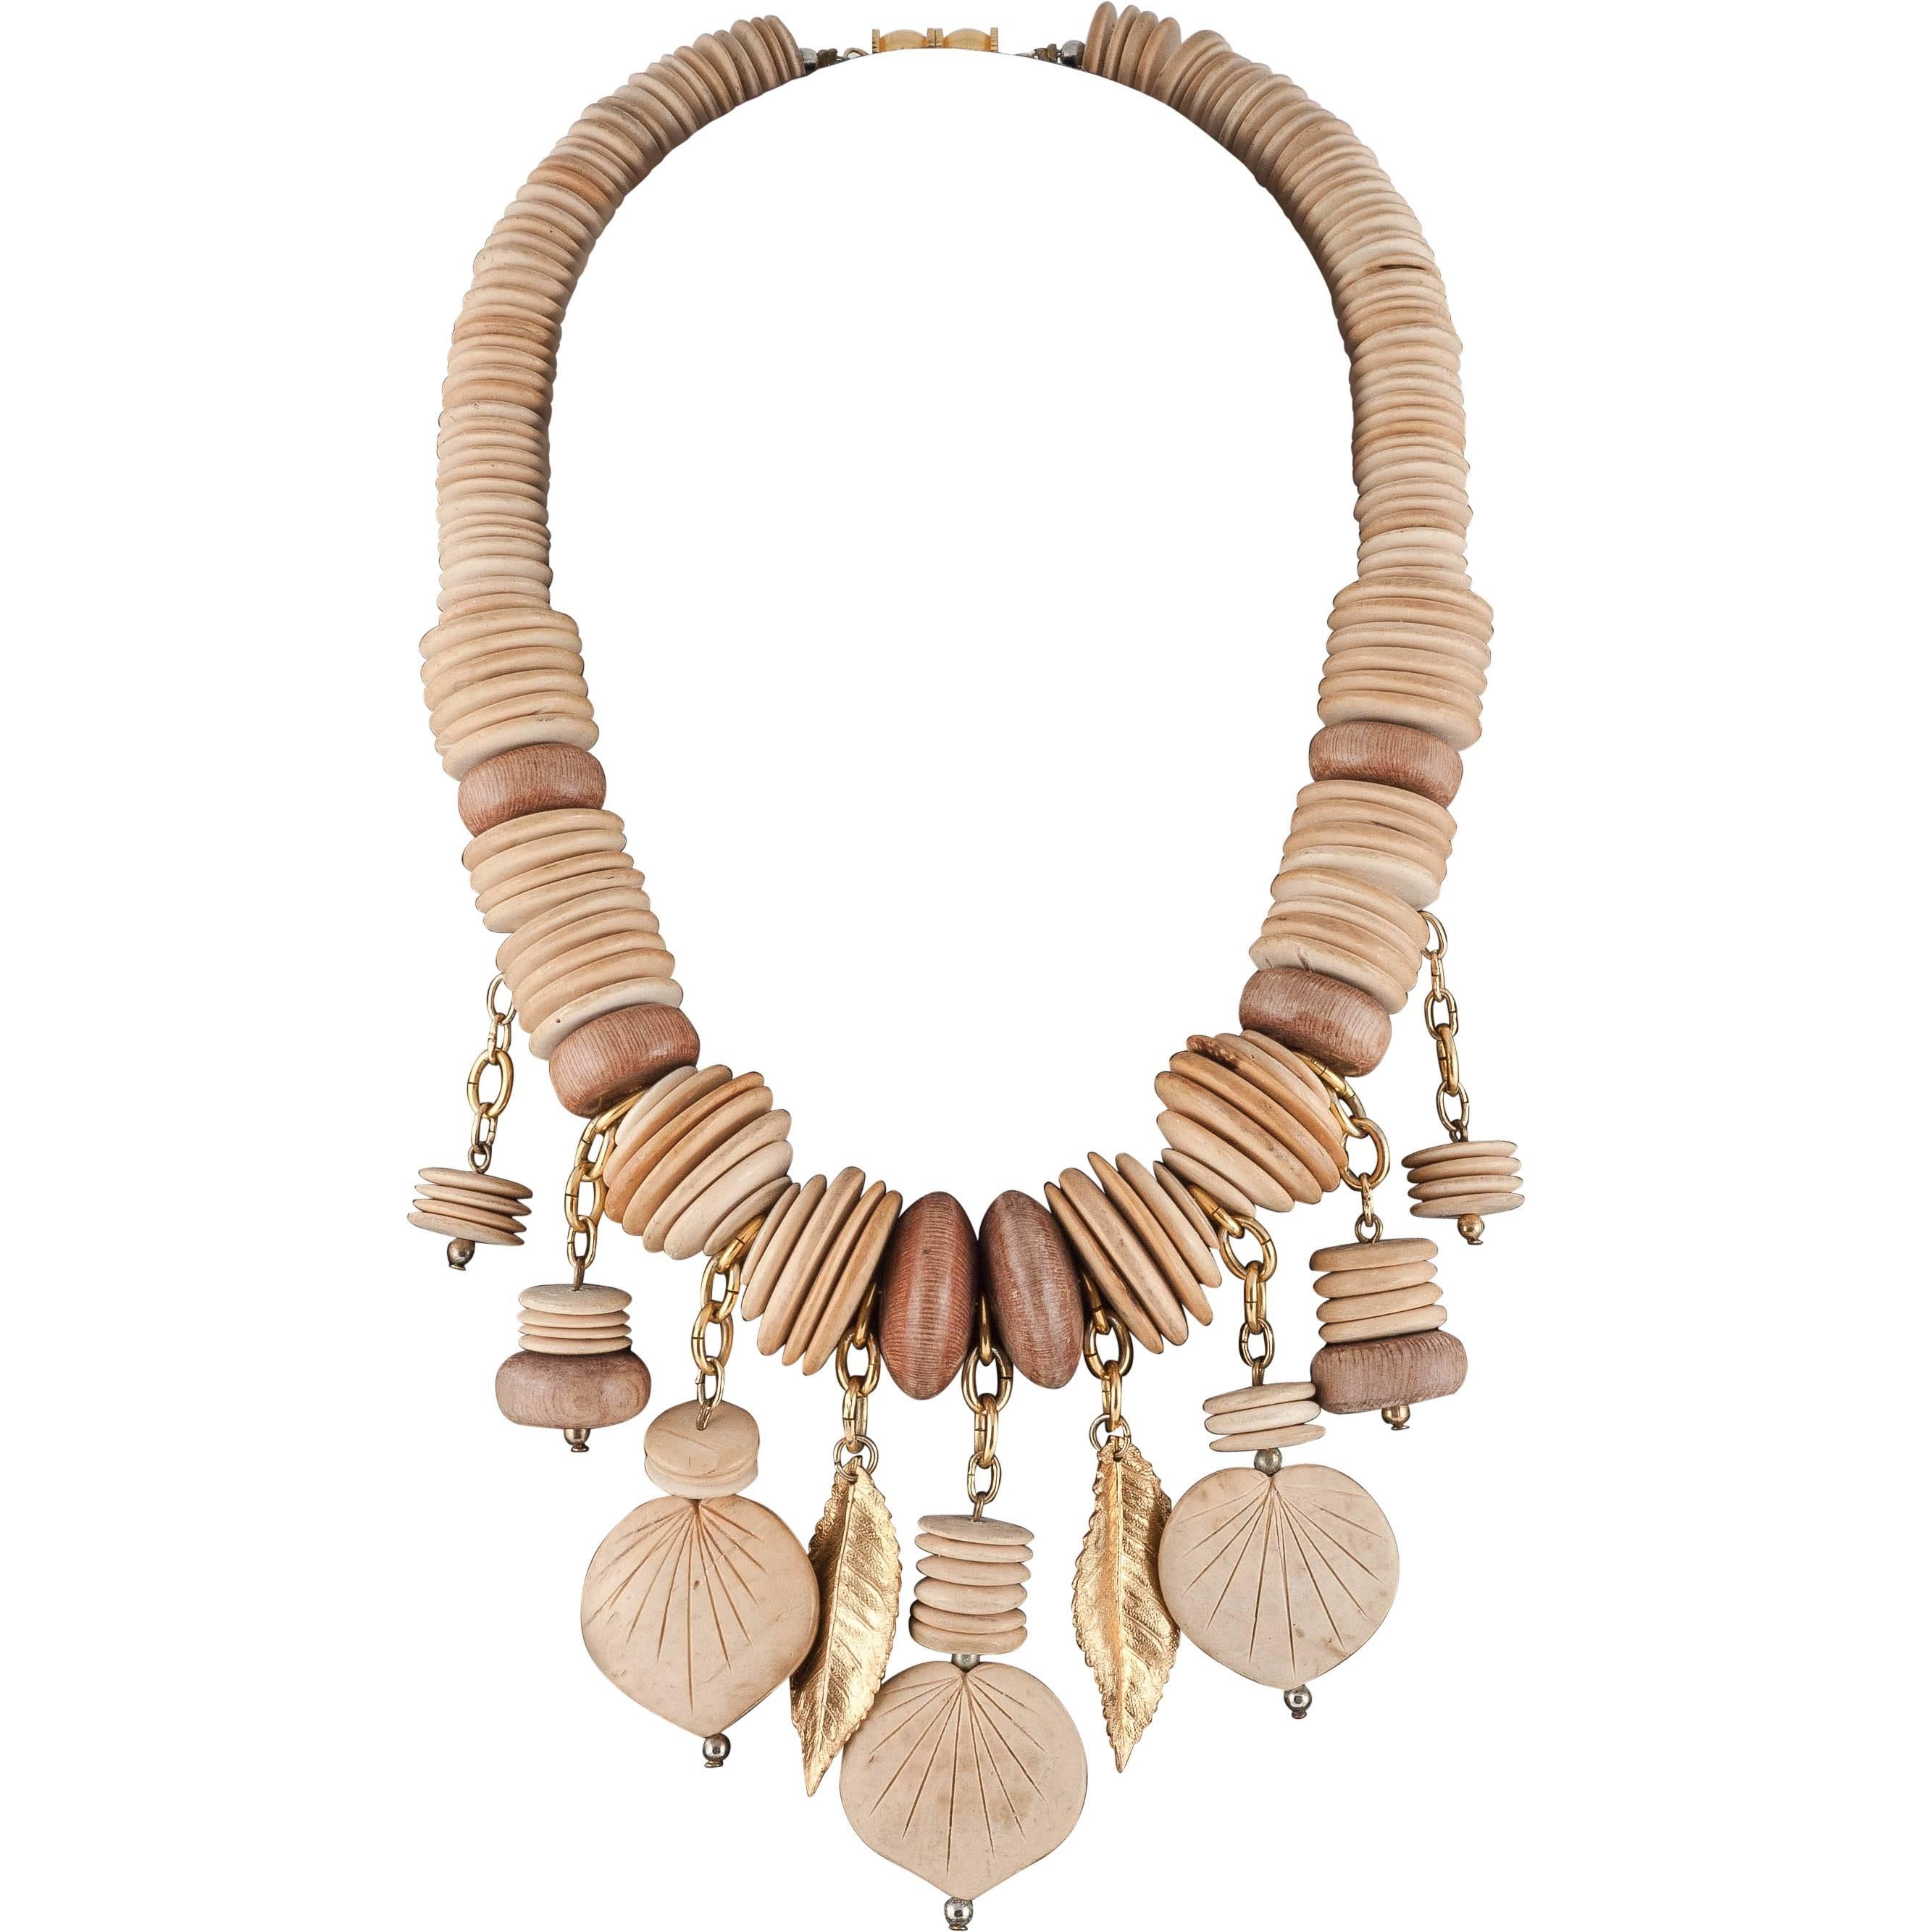 Guy Laroche 1970s wood and gilt necklace 